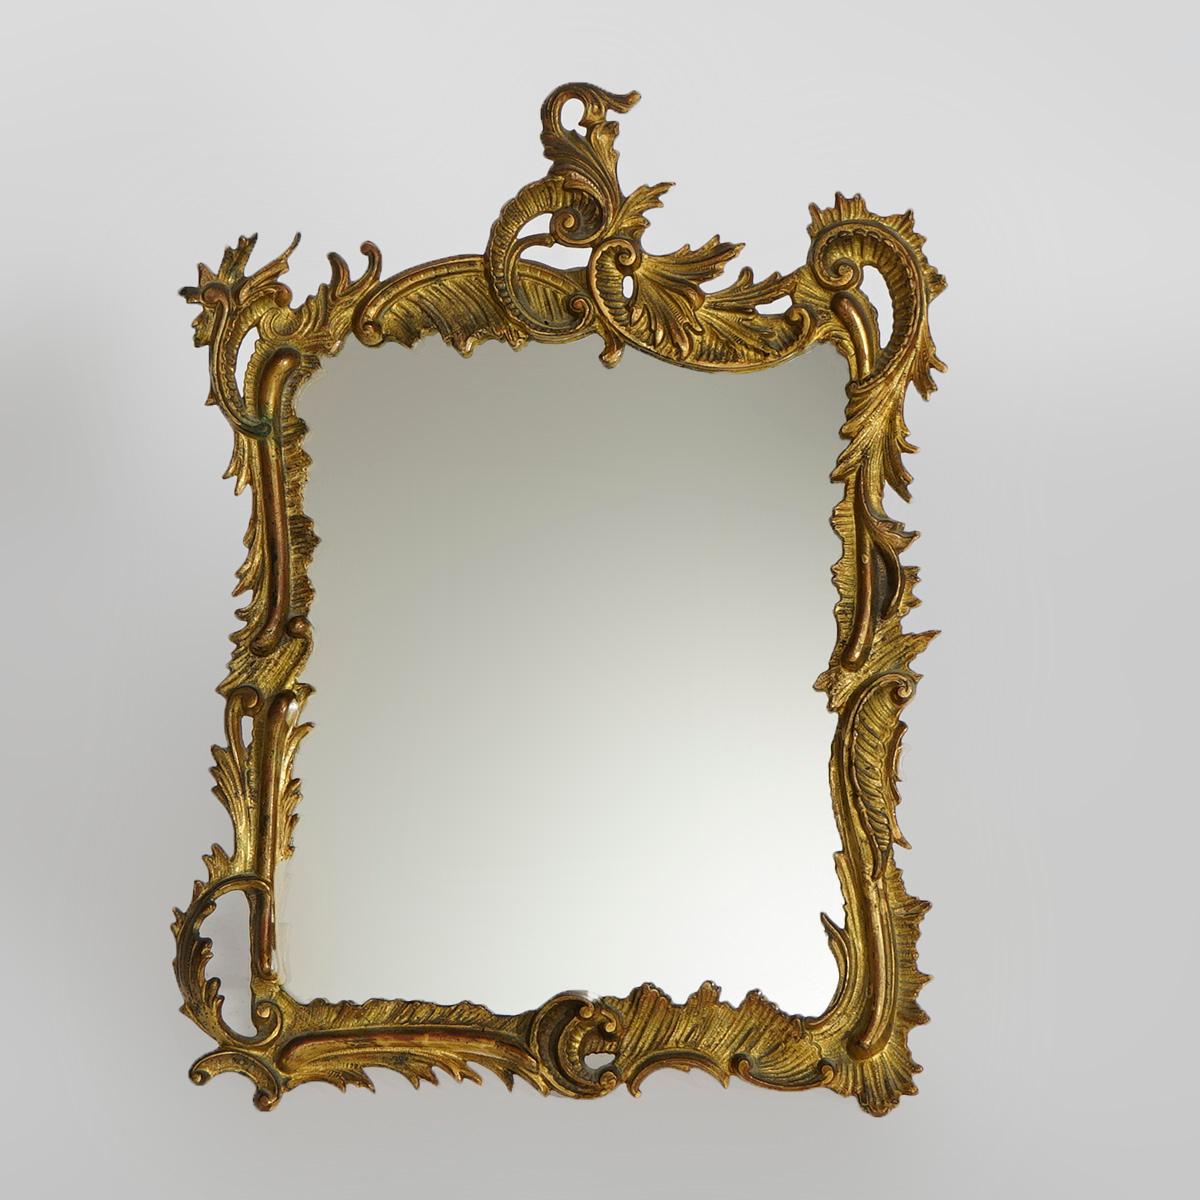 An antique French Rococo style vanity or dresser mirror offers cast bronze frame in foliate form with mirror having easel back, 19th century.

Measures- 17.75''H x 13.25''W x .5''D.

Catalogue Note: Ask about DISCOUNTED DELIVERY RATES available to